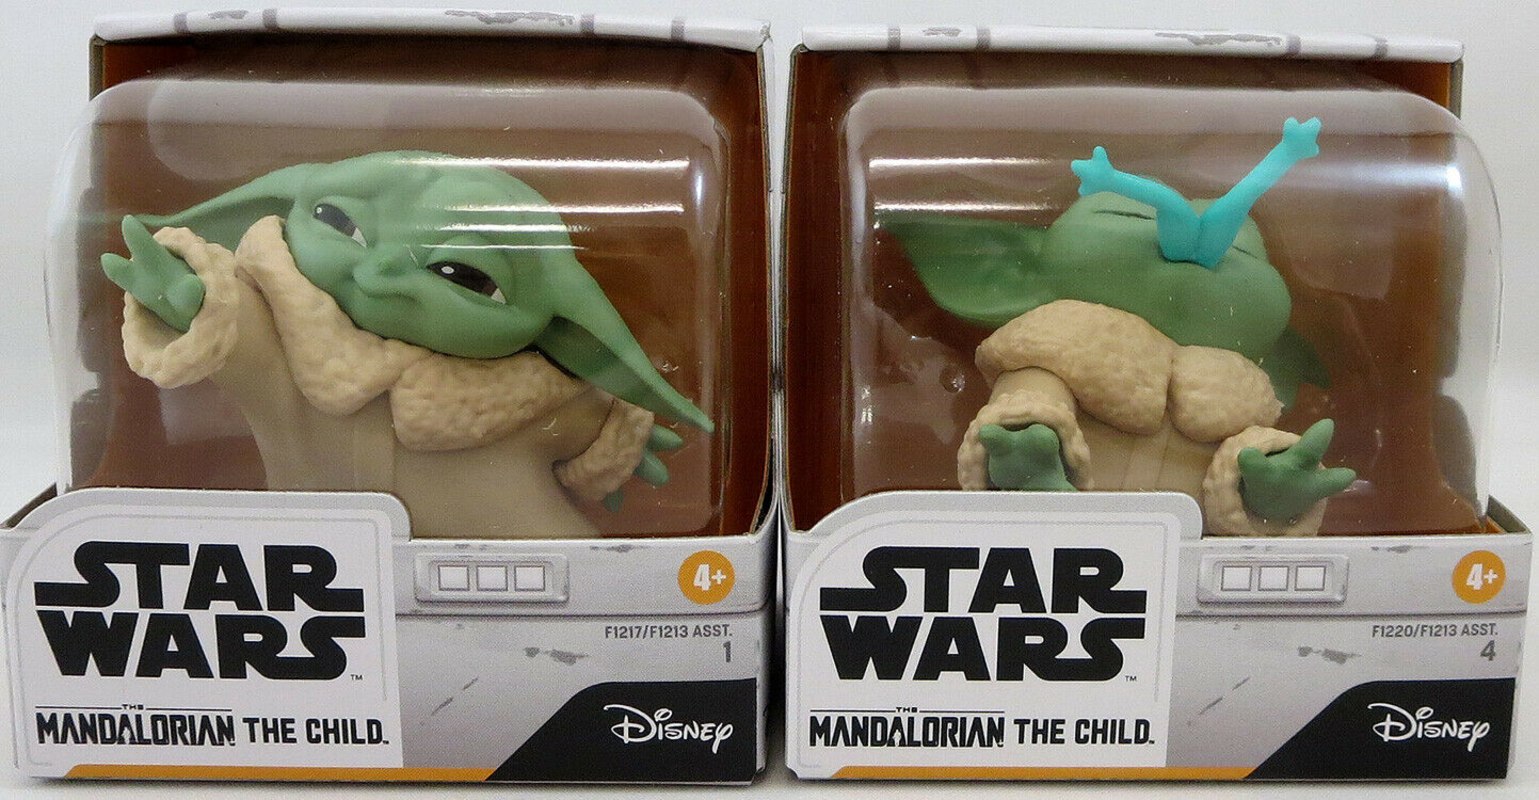 STAR WARS THE MANDALORIAN THE CHILD BOUNTY COLLECTION 2 PACK 2.2" FIGURES 1 & 4 